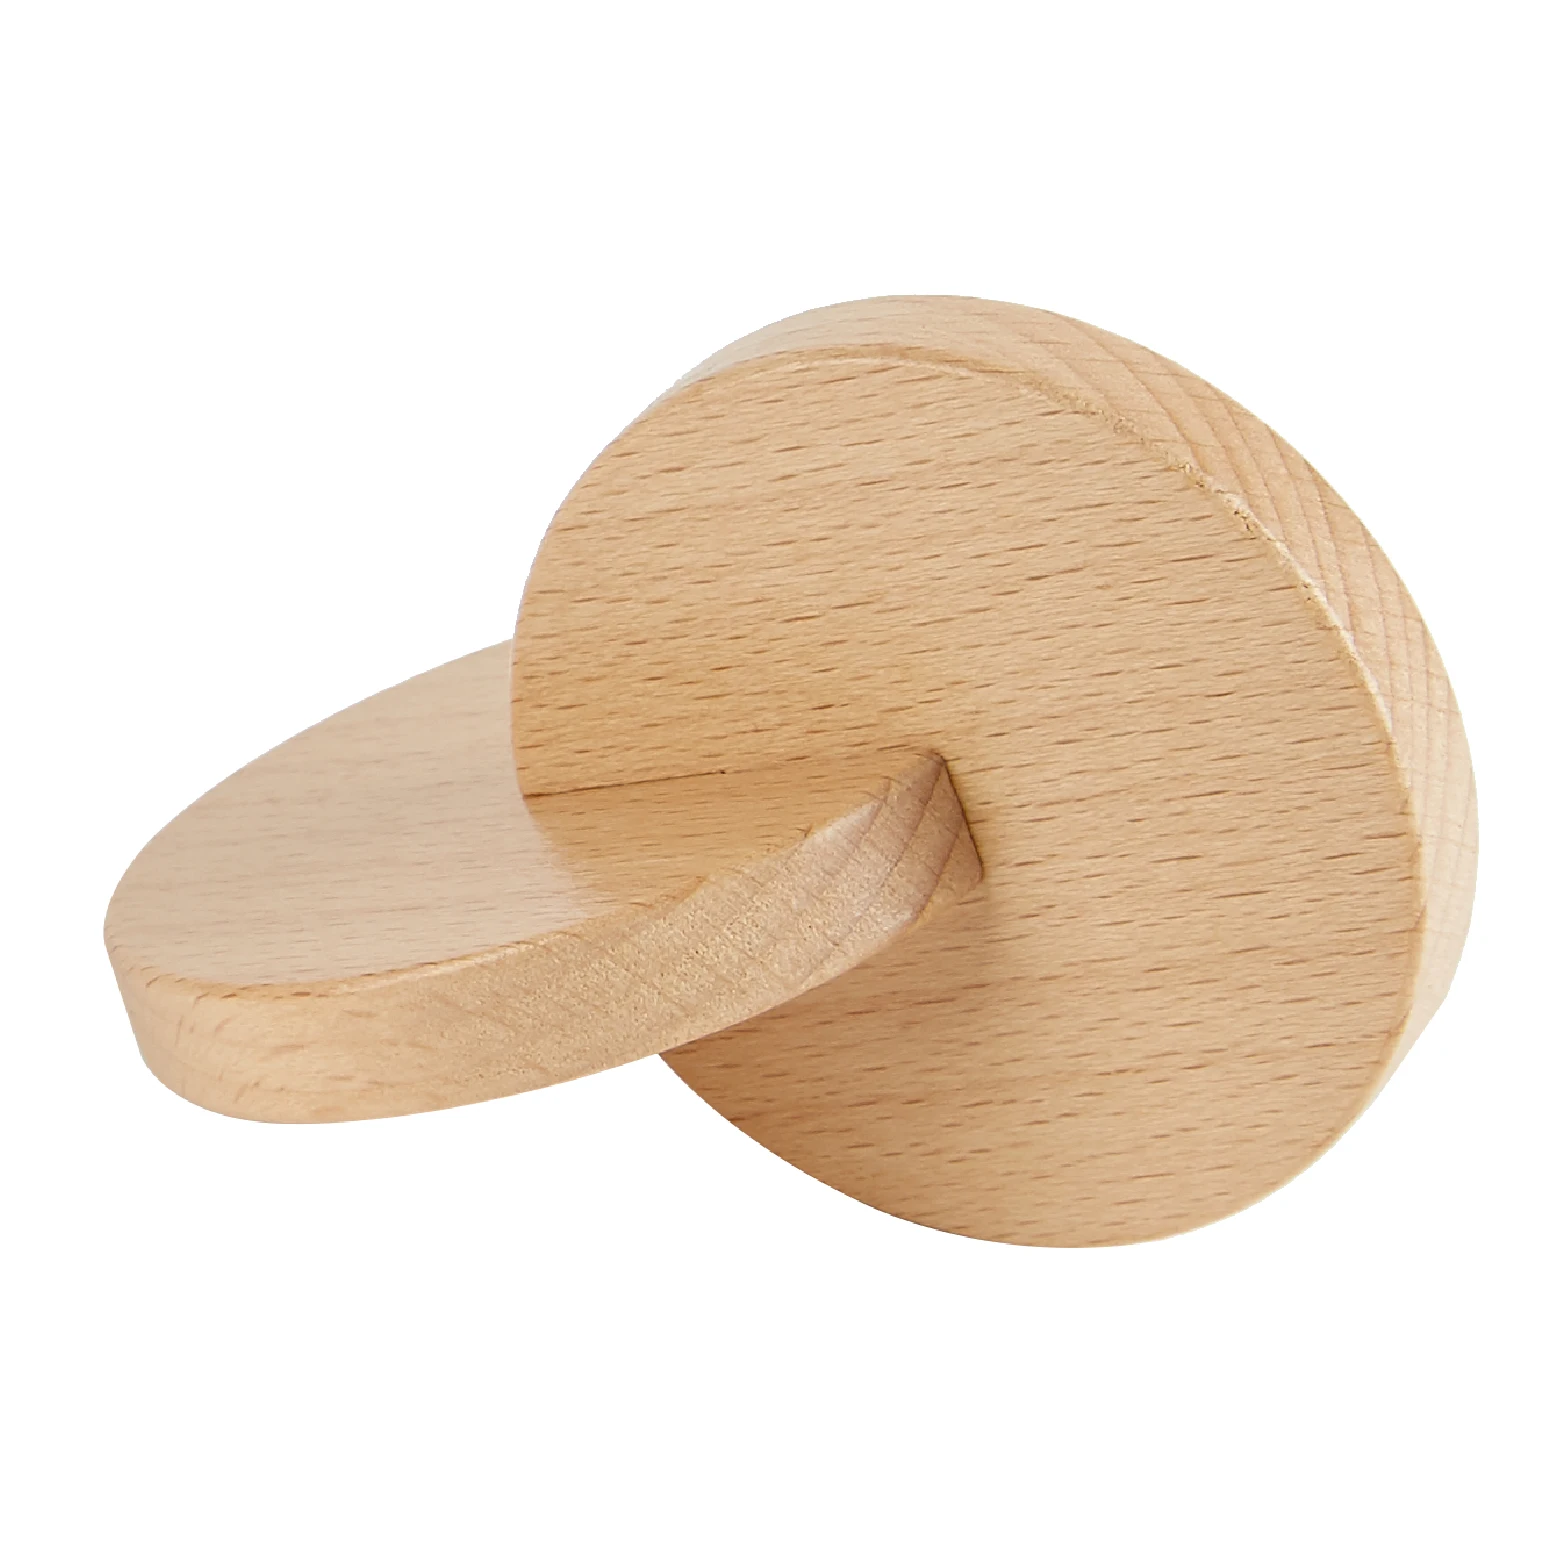 JE JOUE Montessori Materials Wooden Interlocking Discs Teether Toys for Infant 